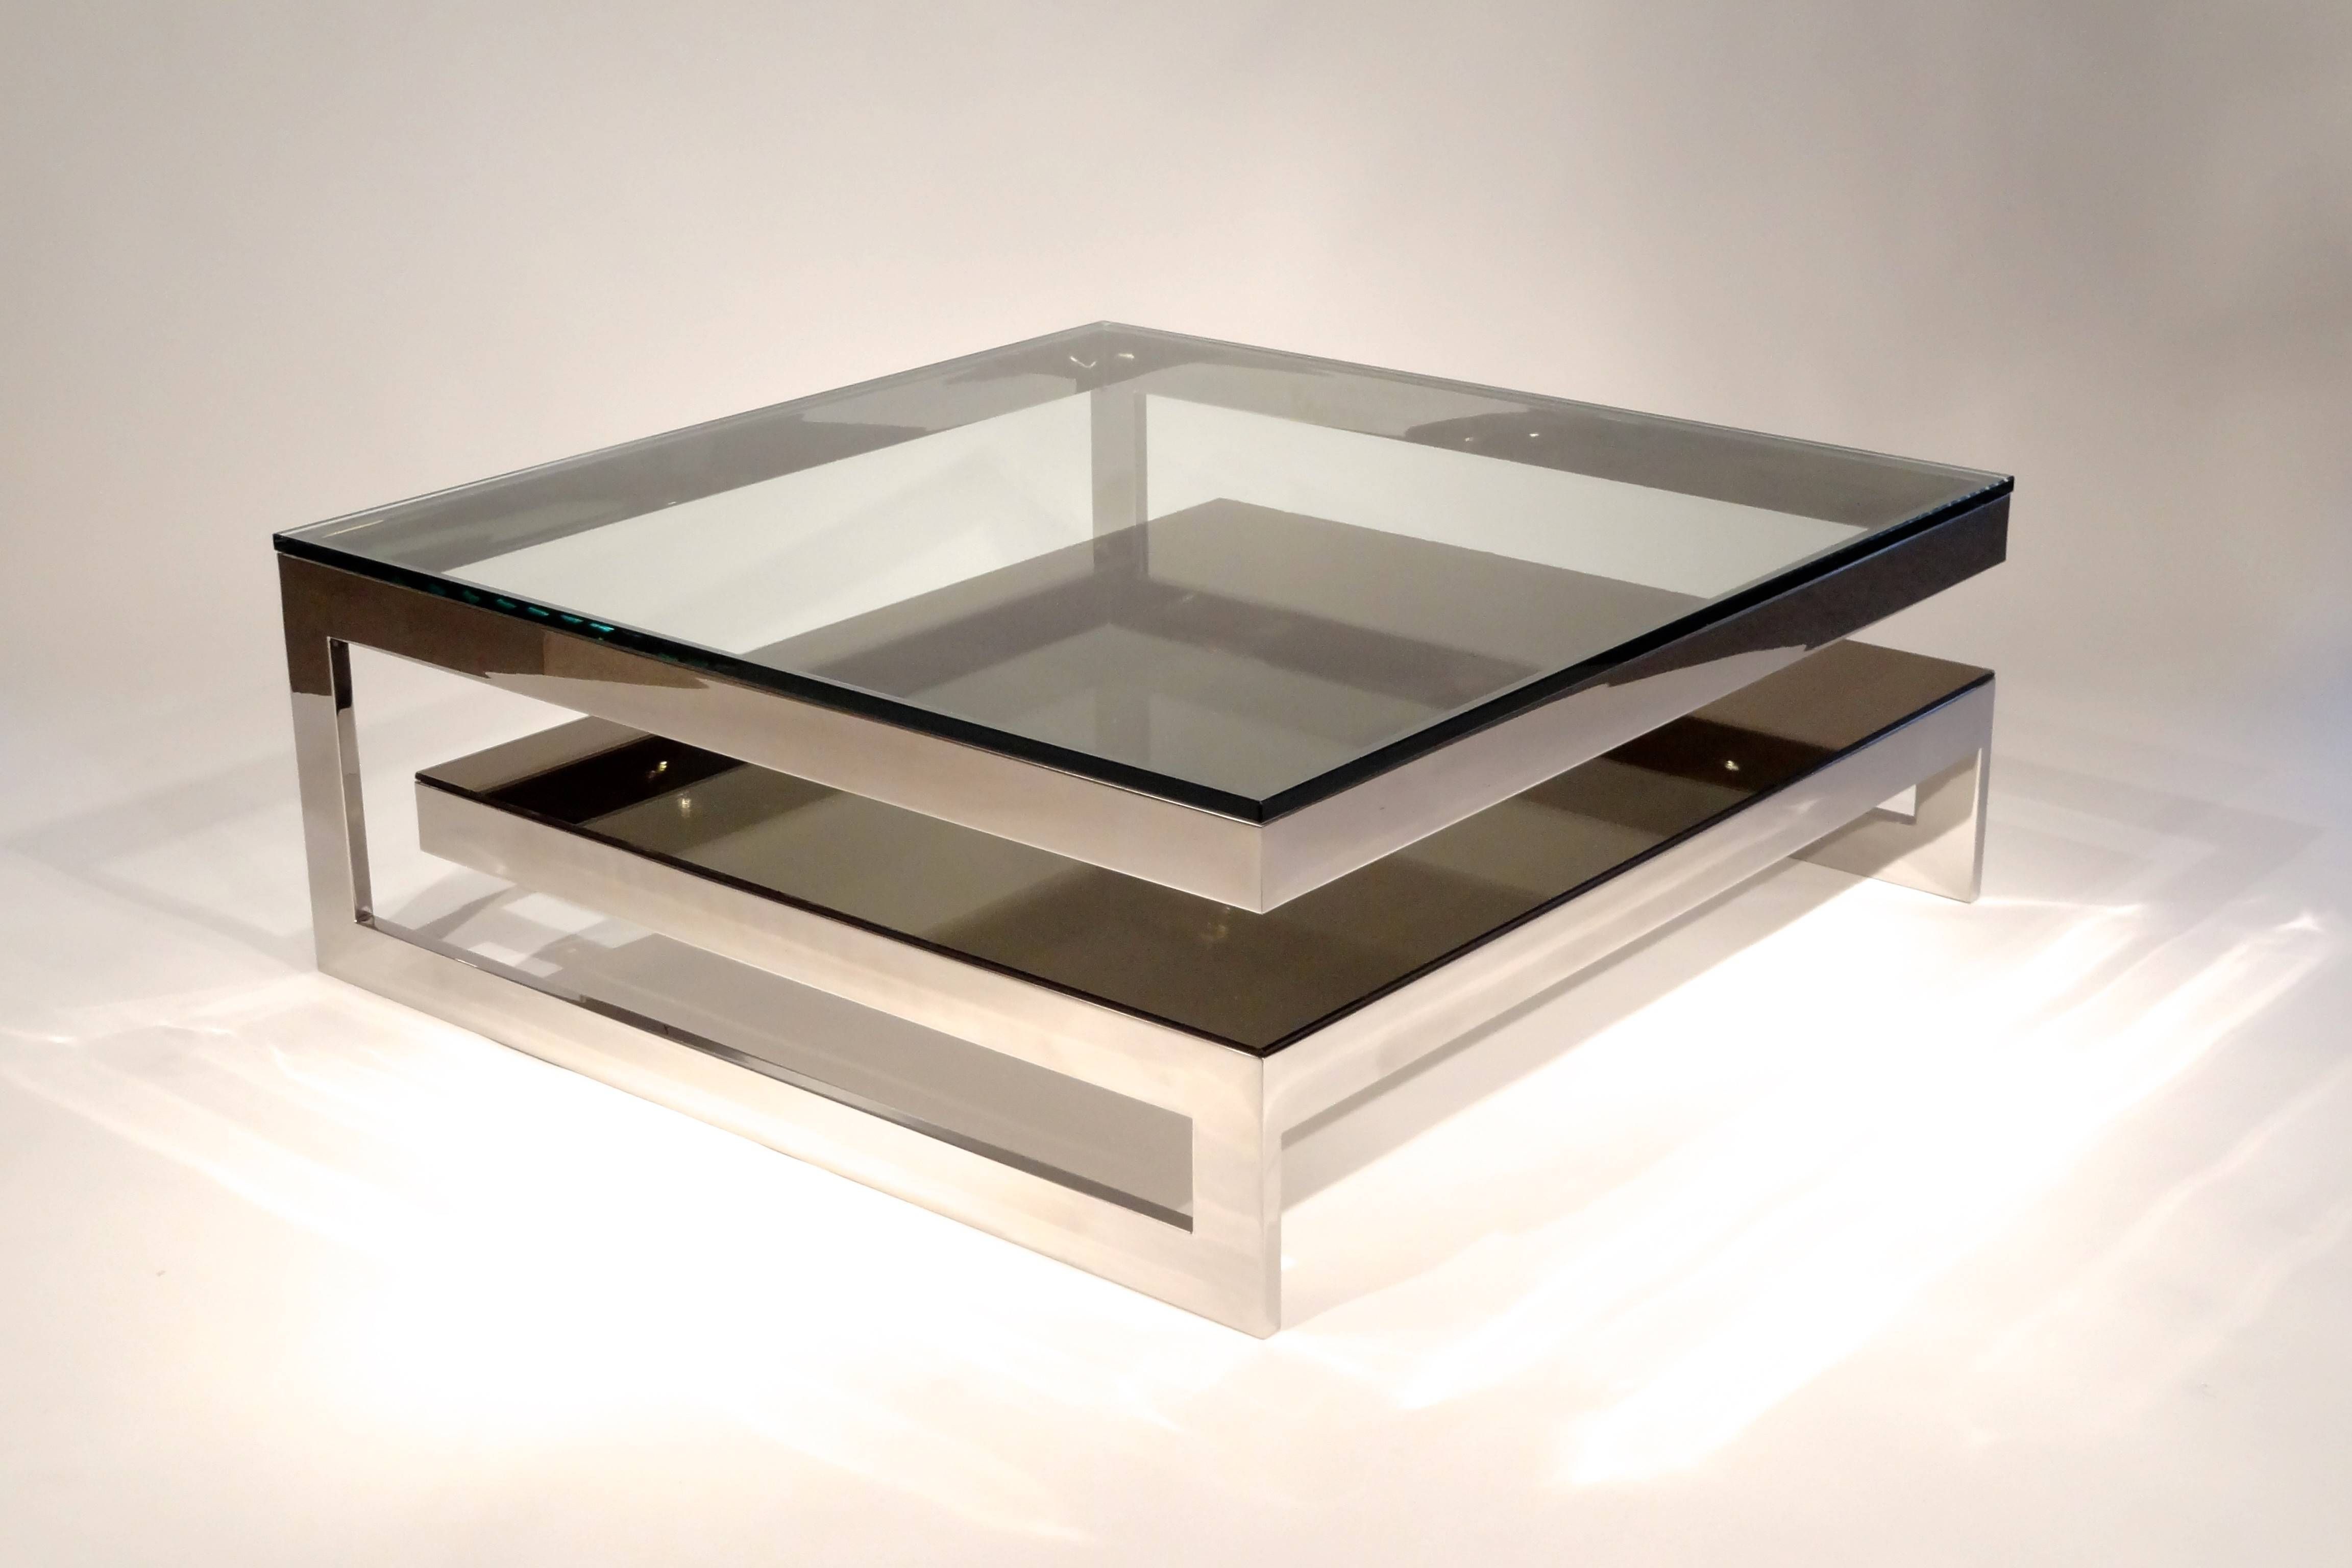 Modern Glass Coffee Table Square Shape Living Room Furniture Ideas Regarding Square Shaped Coffee Tables (View 6 of 30)